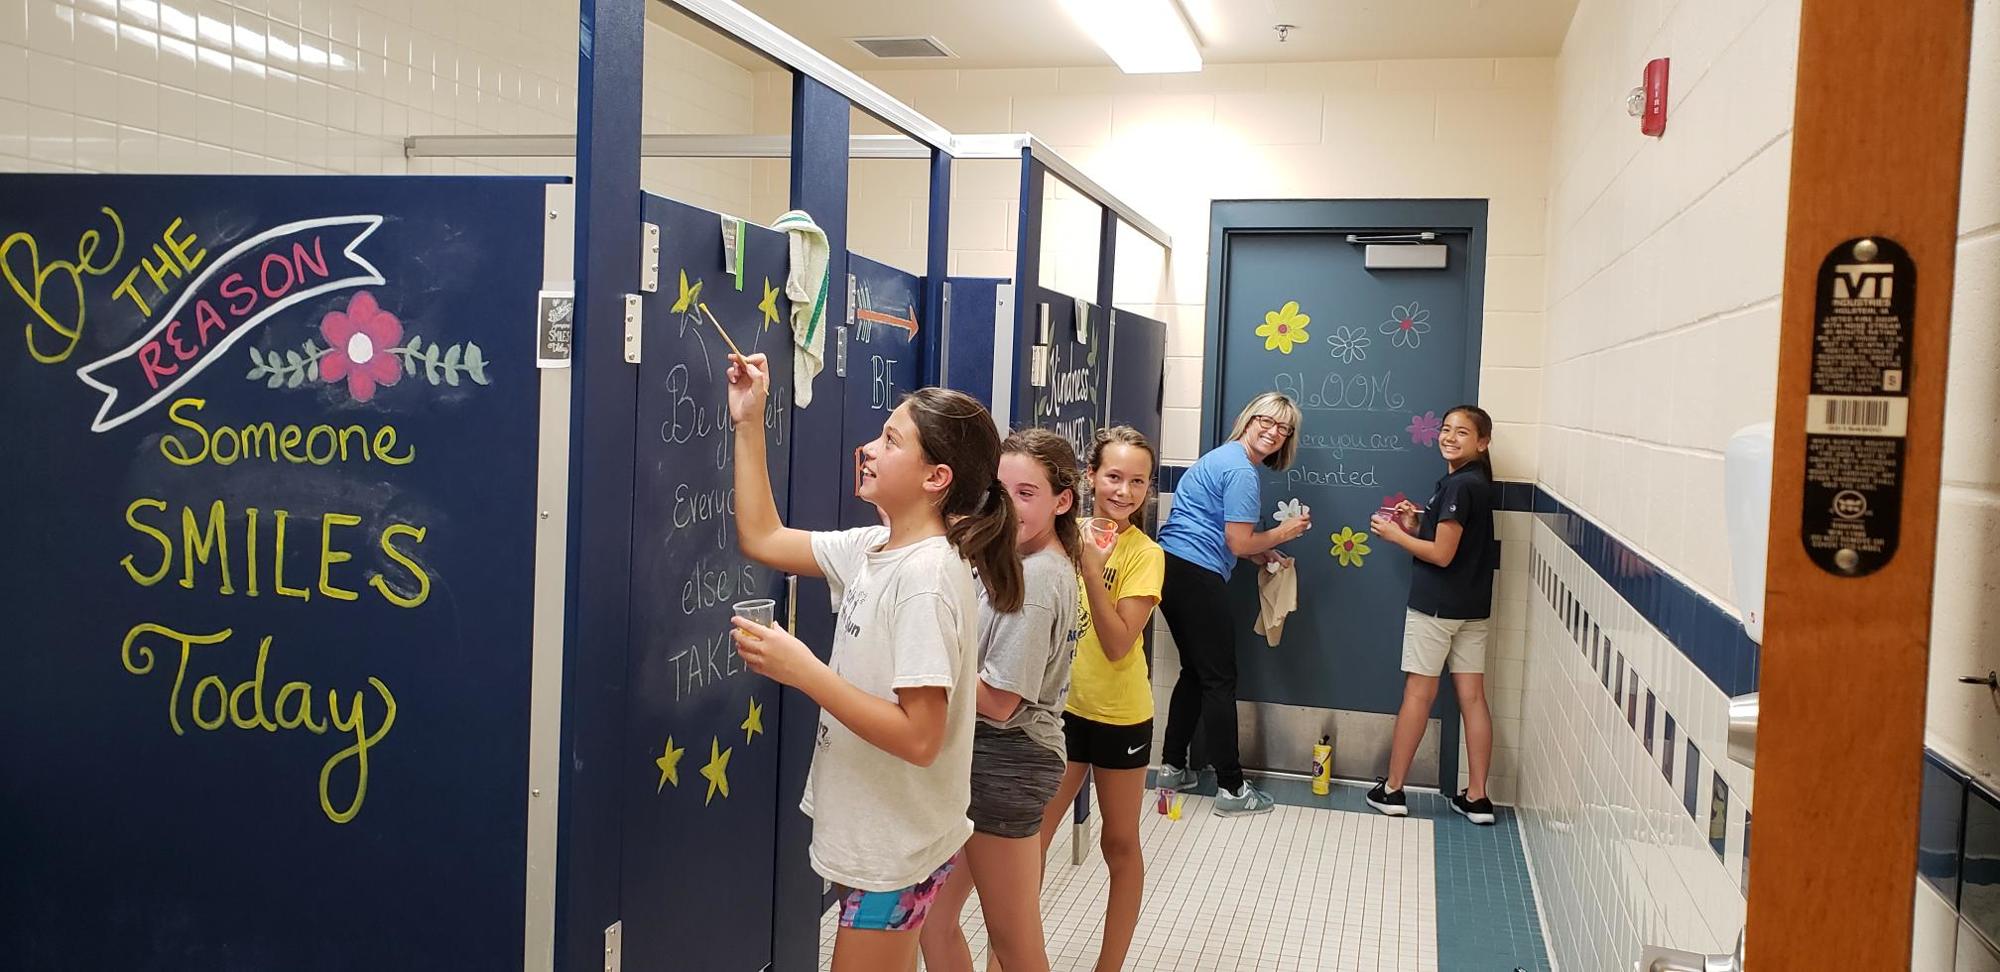 ISTC students Annabelle Moore, Mila McKee, Jordan Draugelat and Sydney Allen paint positive messages with parent Sandy Sylvester. Photo courtesy of ISTC